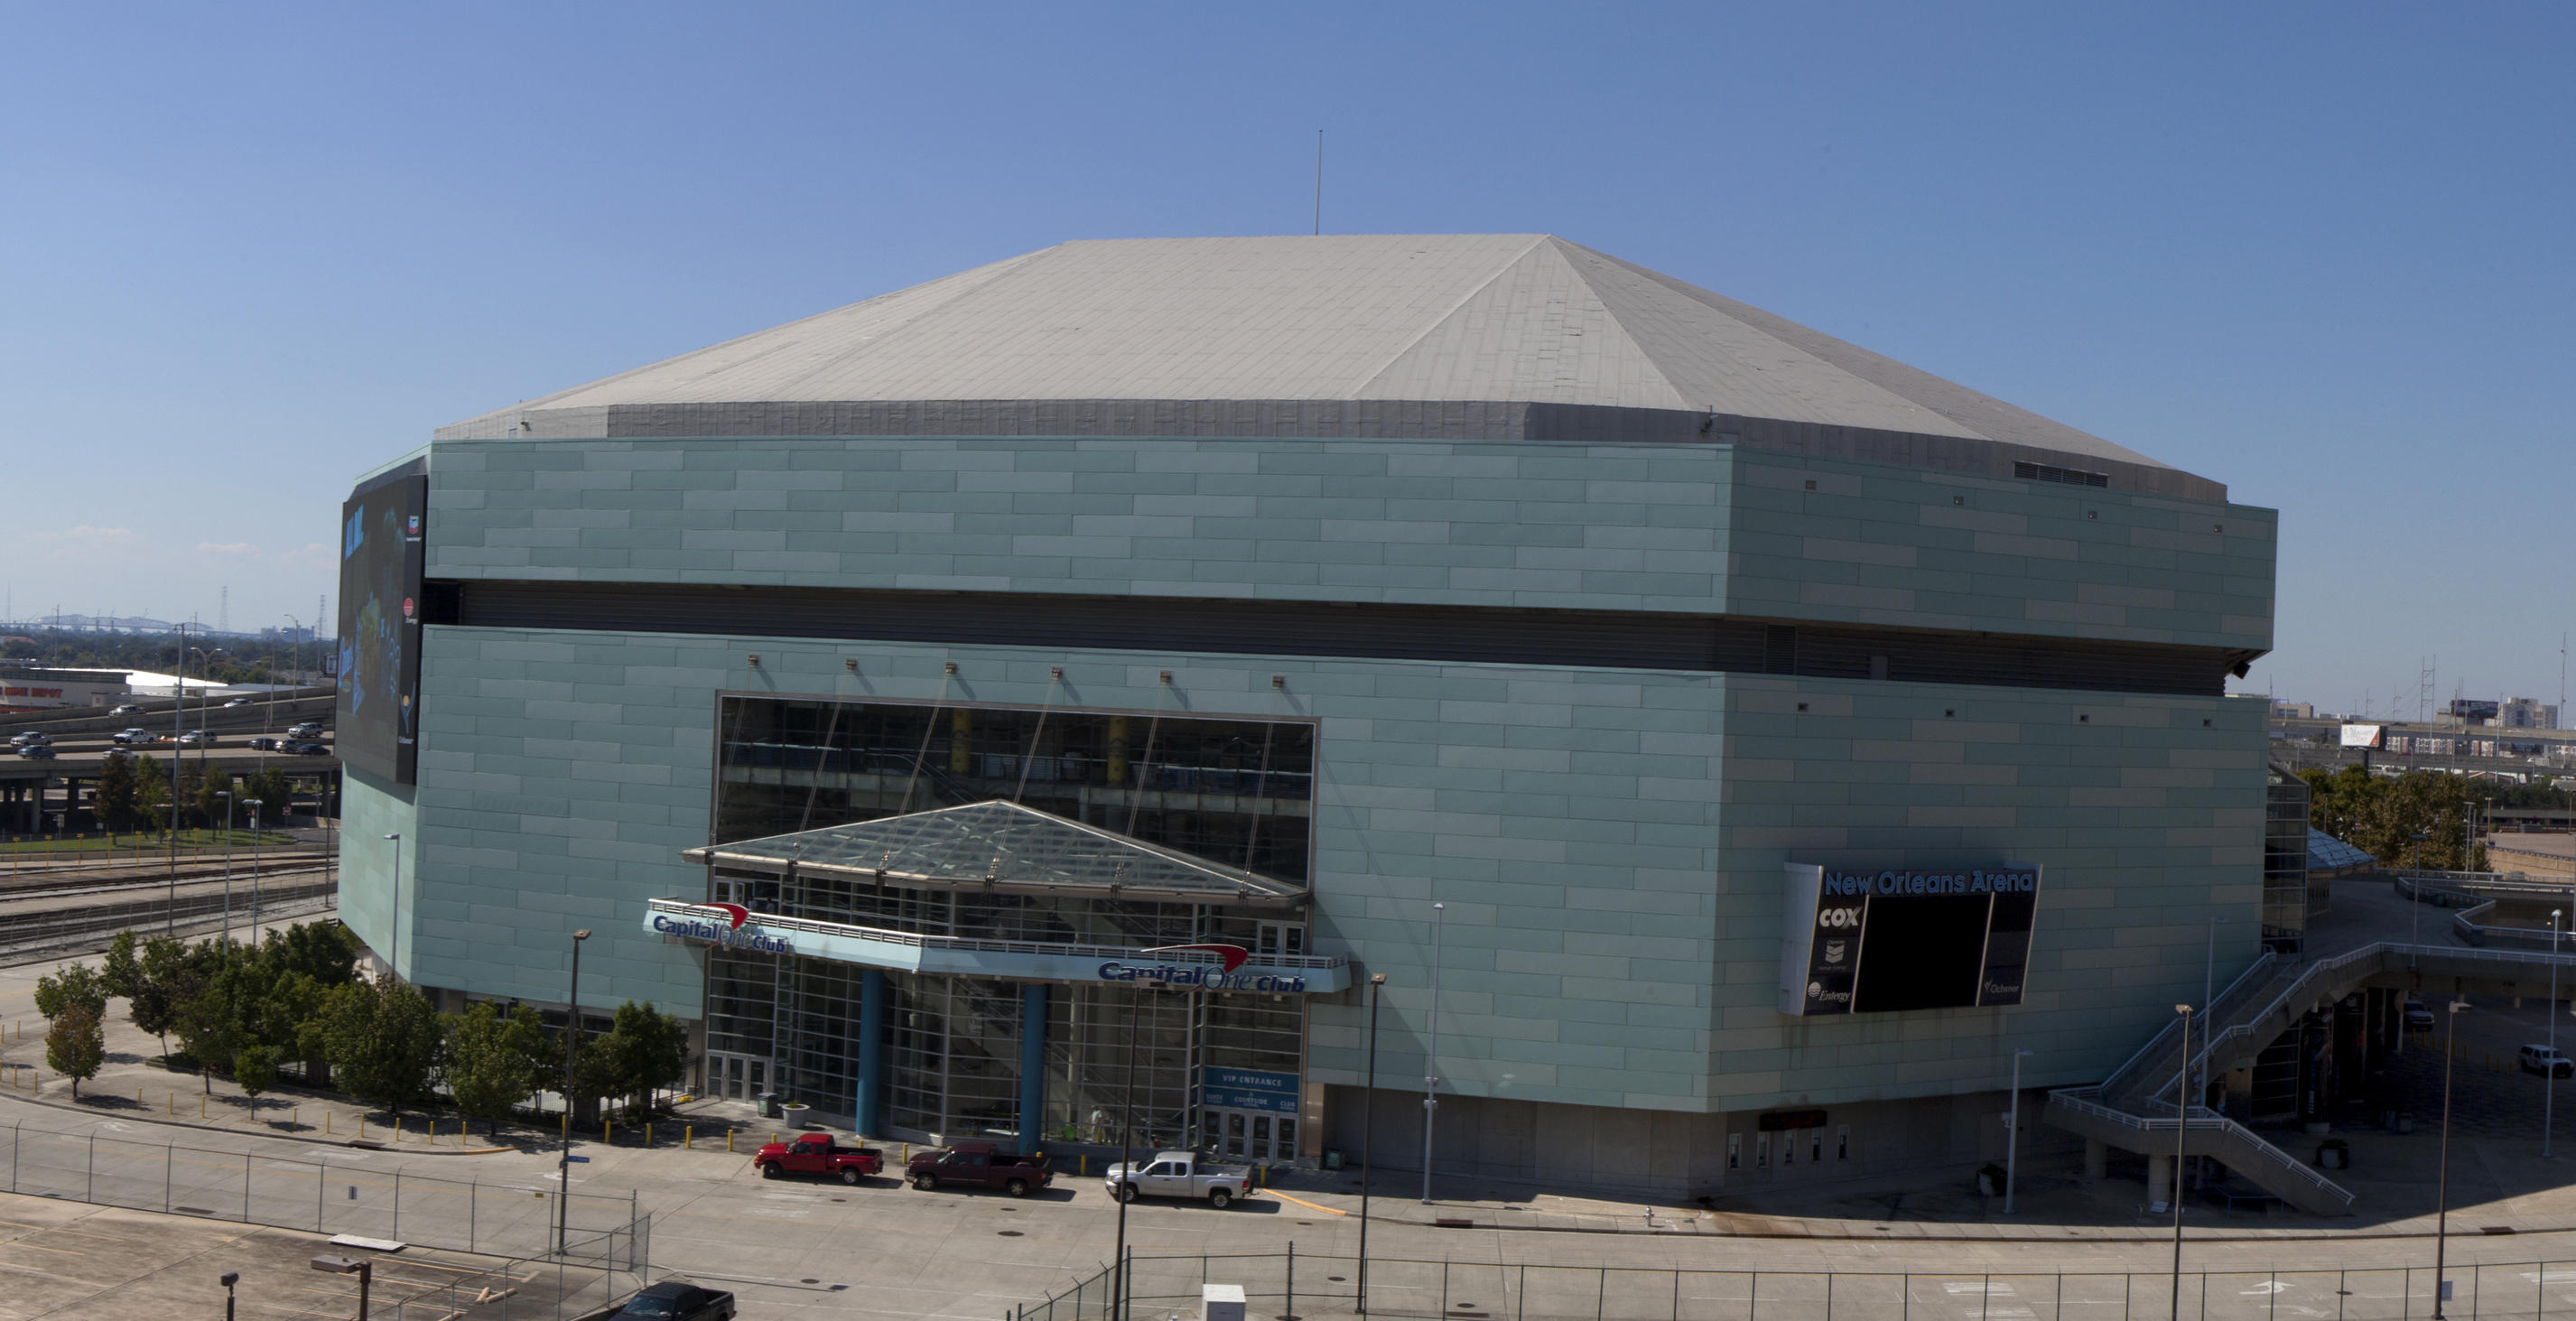 The Smoothie King Center: A Multi-Purpose Indoor Arena In New